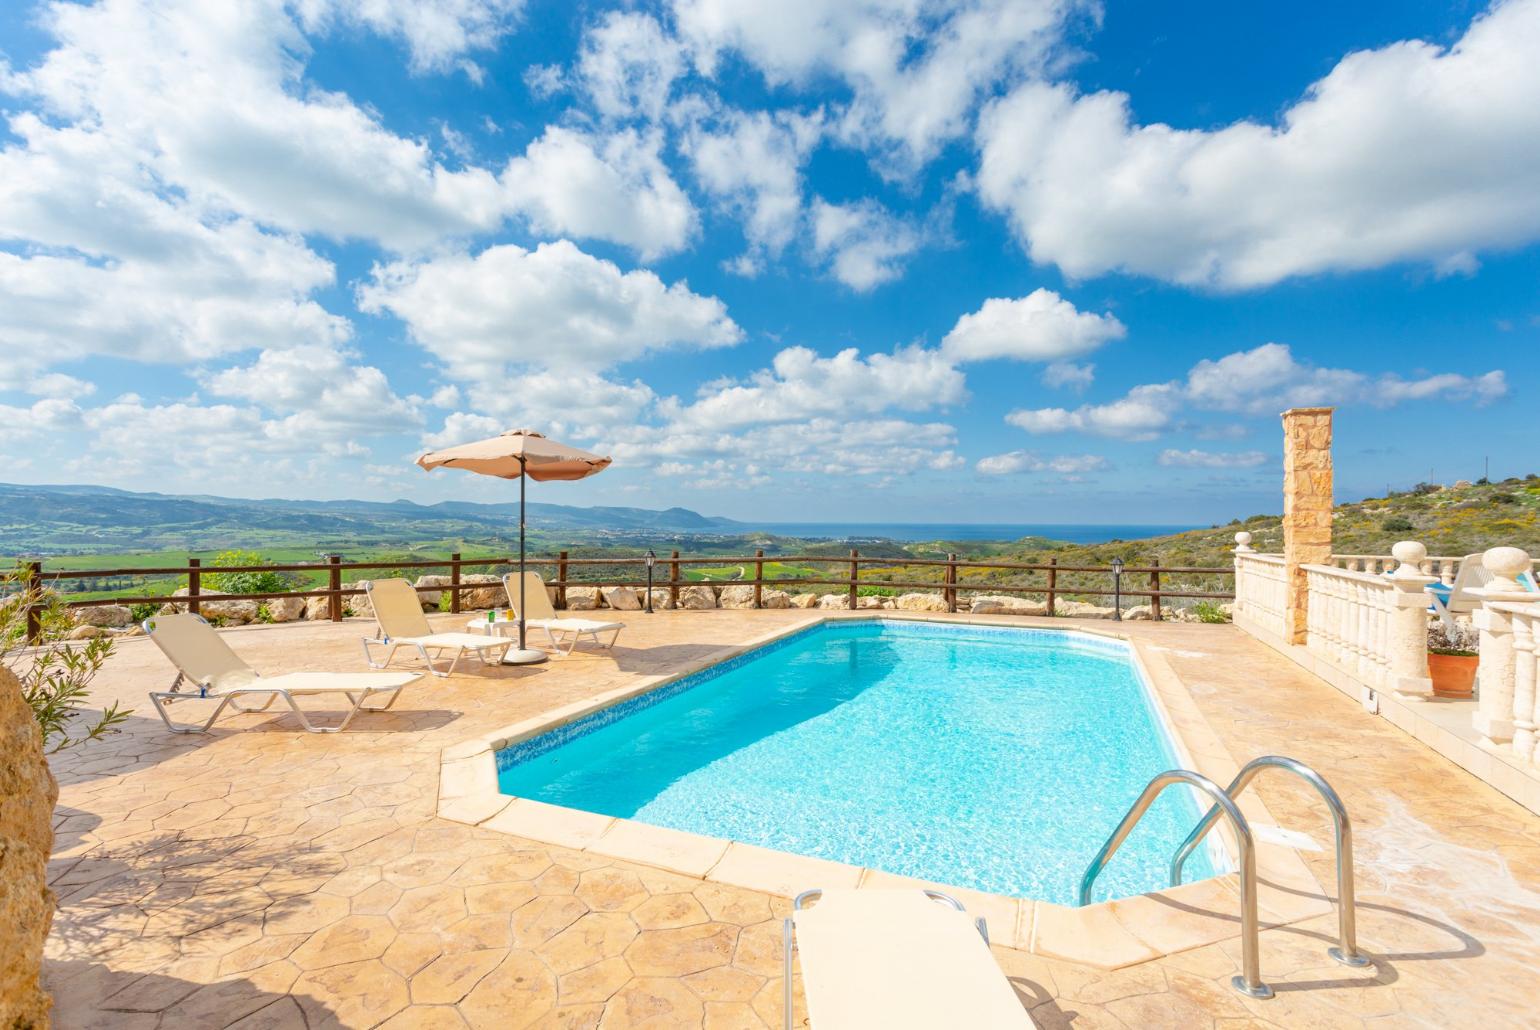 Private pool and terrace with panoramic views of the sea and countryside